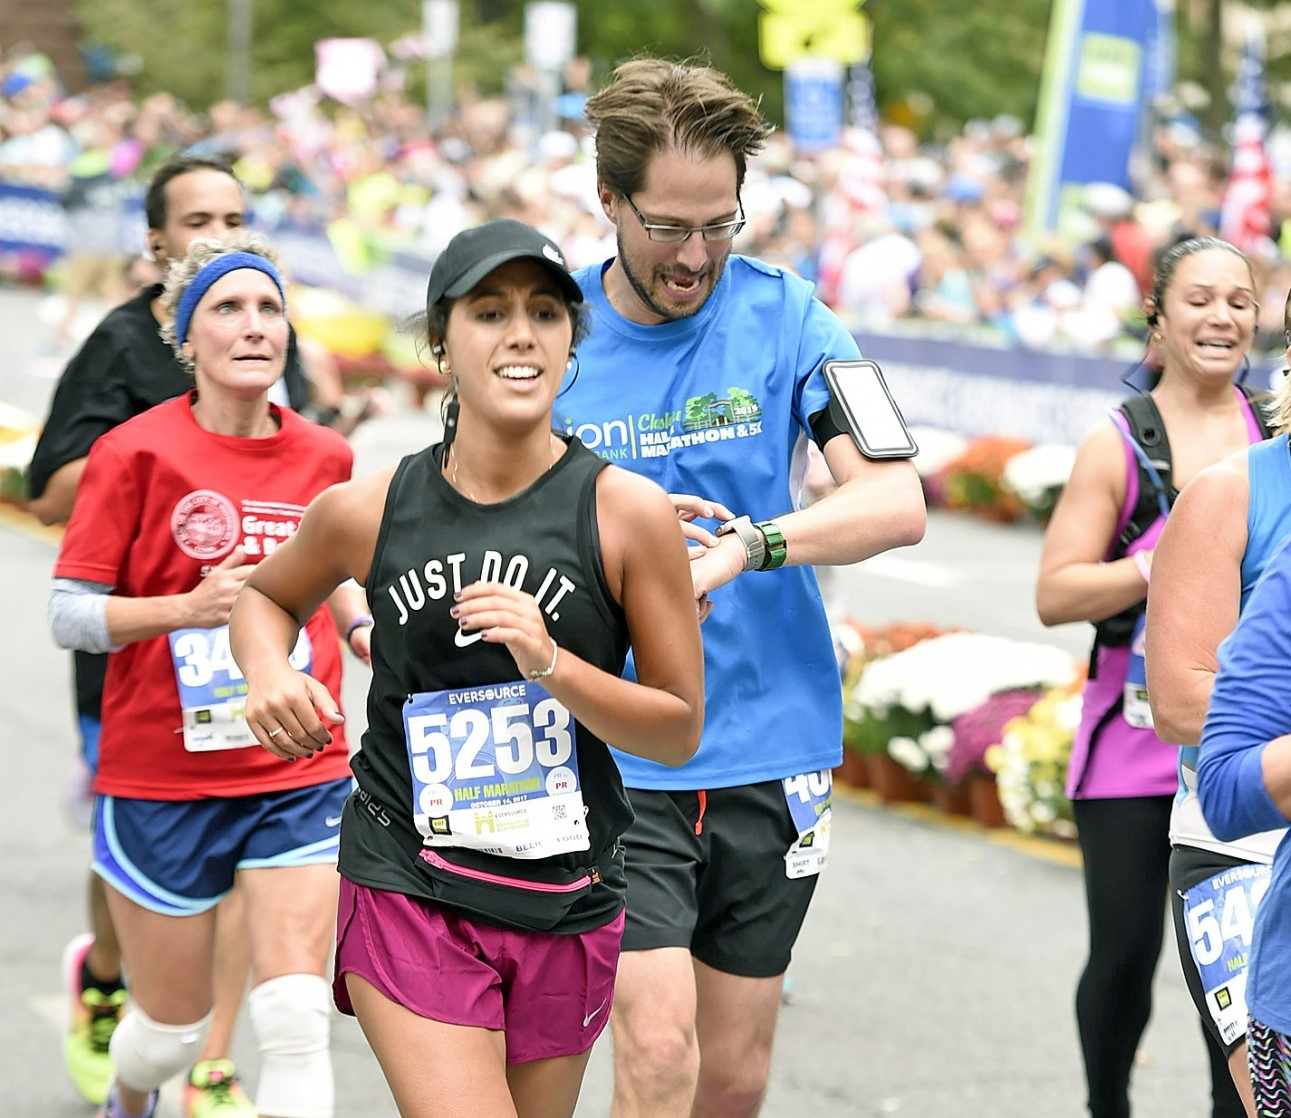 Woman practicing healthy coping mechanisms by running a marathon